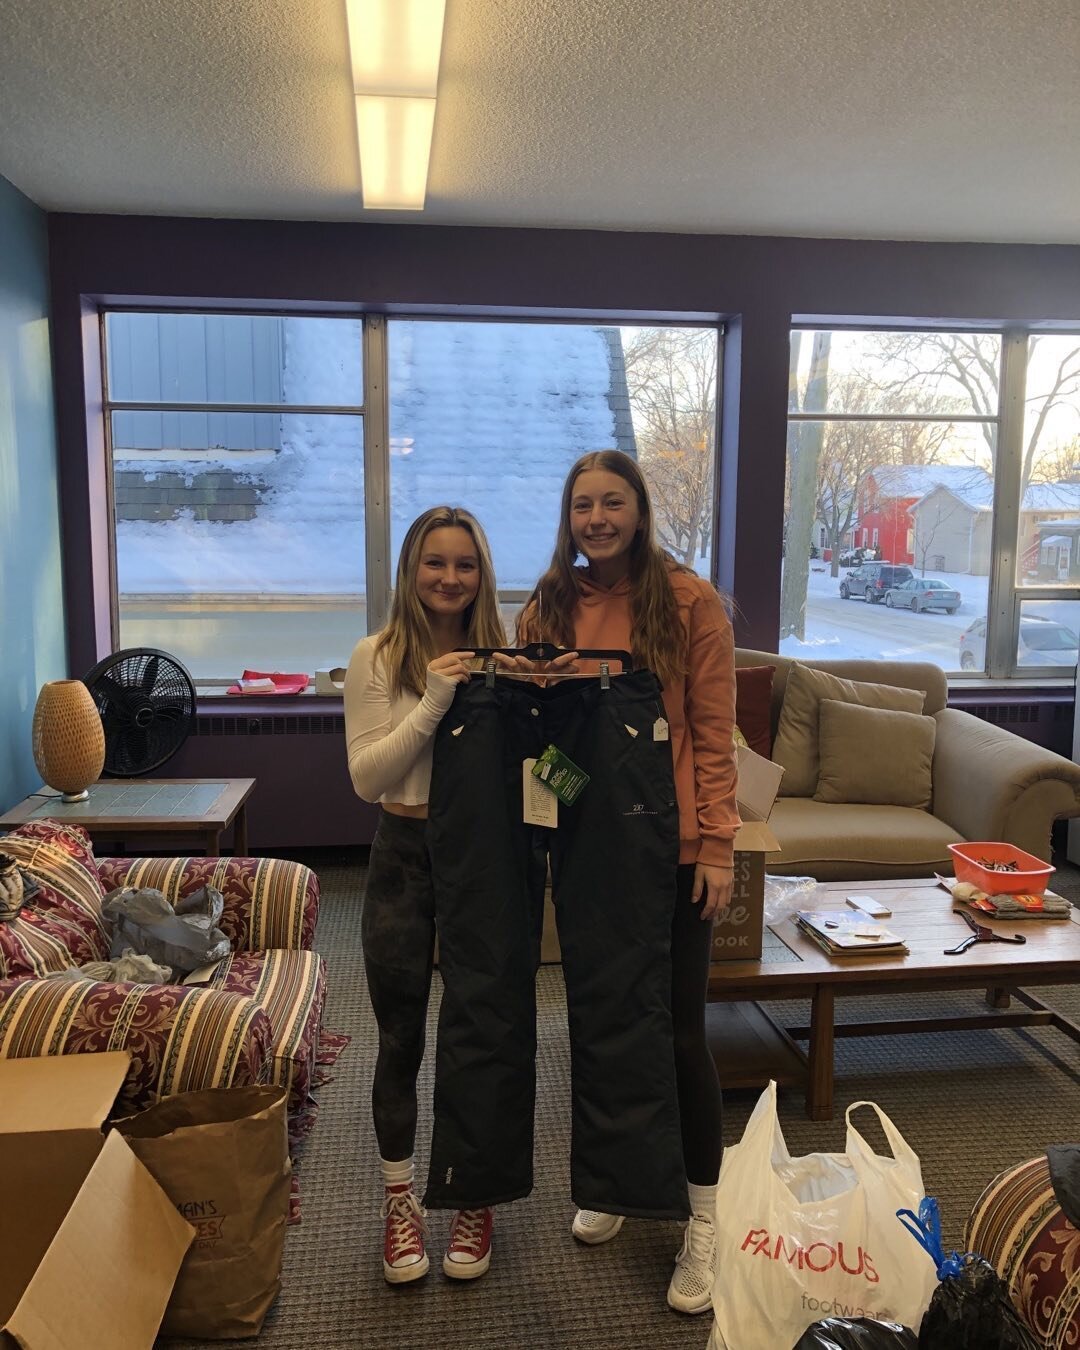 Our high school volunteers found a few pairs of snow pants in our donations last night. Thanks to the person who donated them, and thanks to Katie and Kate!